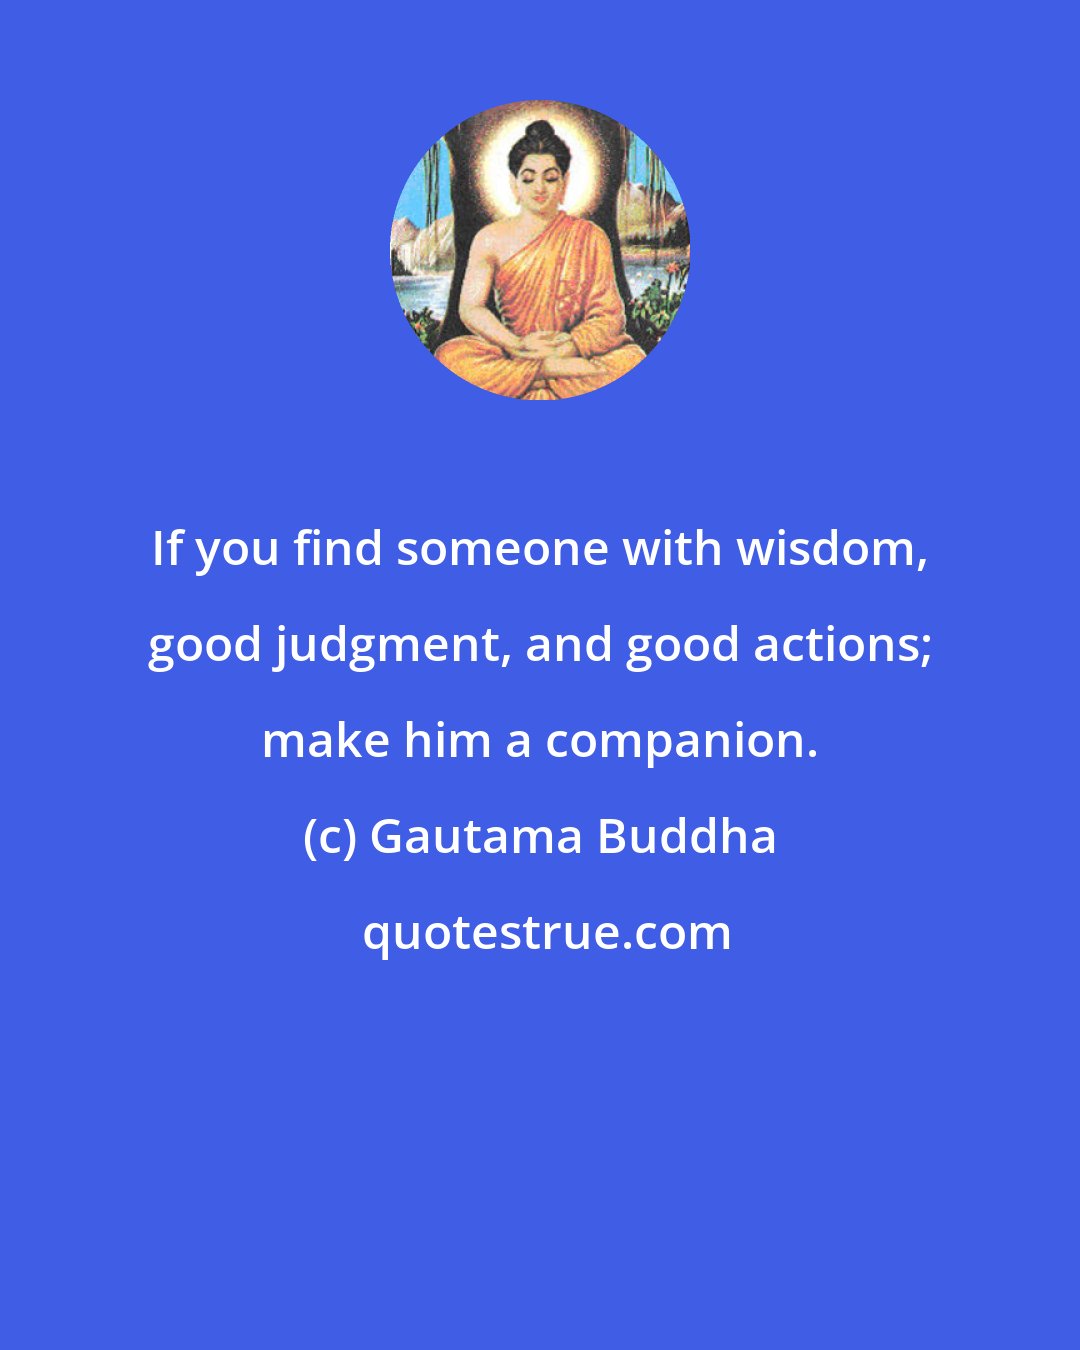 Gautama Buddha: If you find someone with wisdom, good judgment, and good actions; make him a companion.